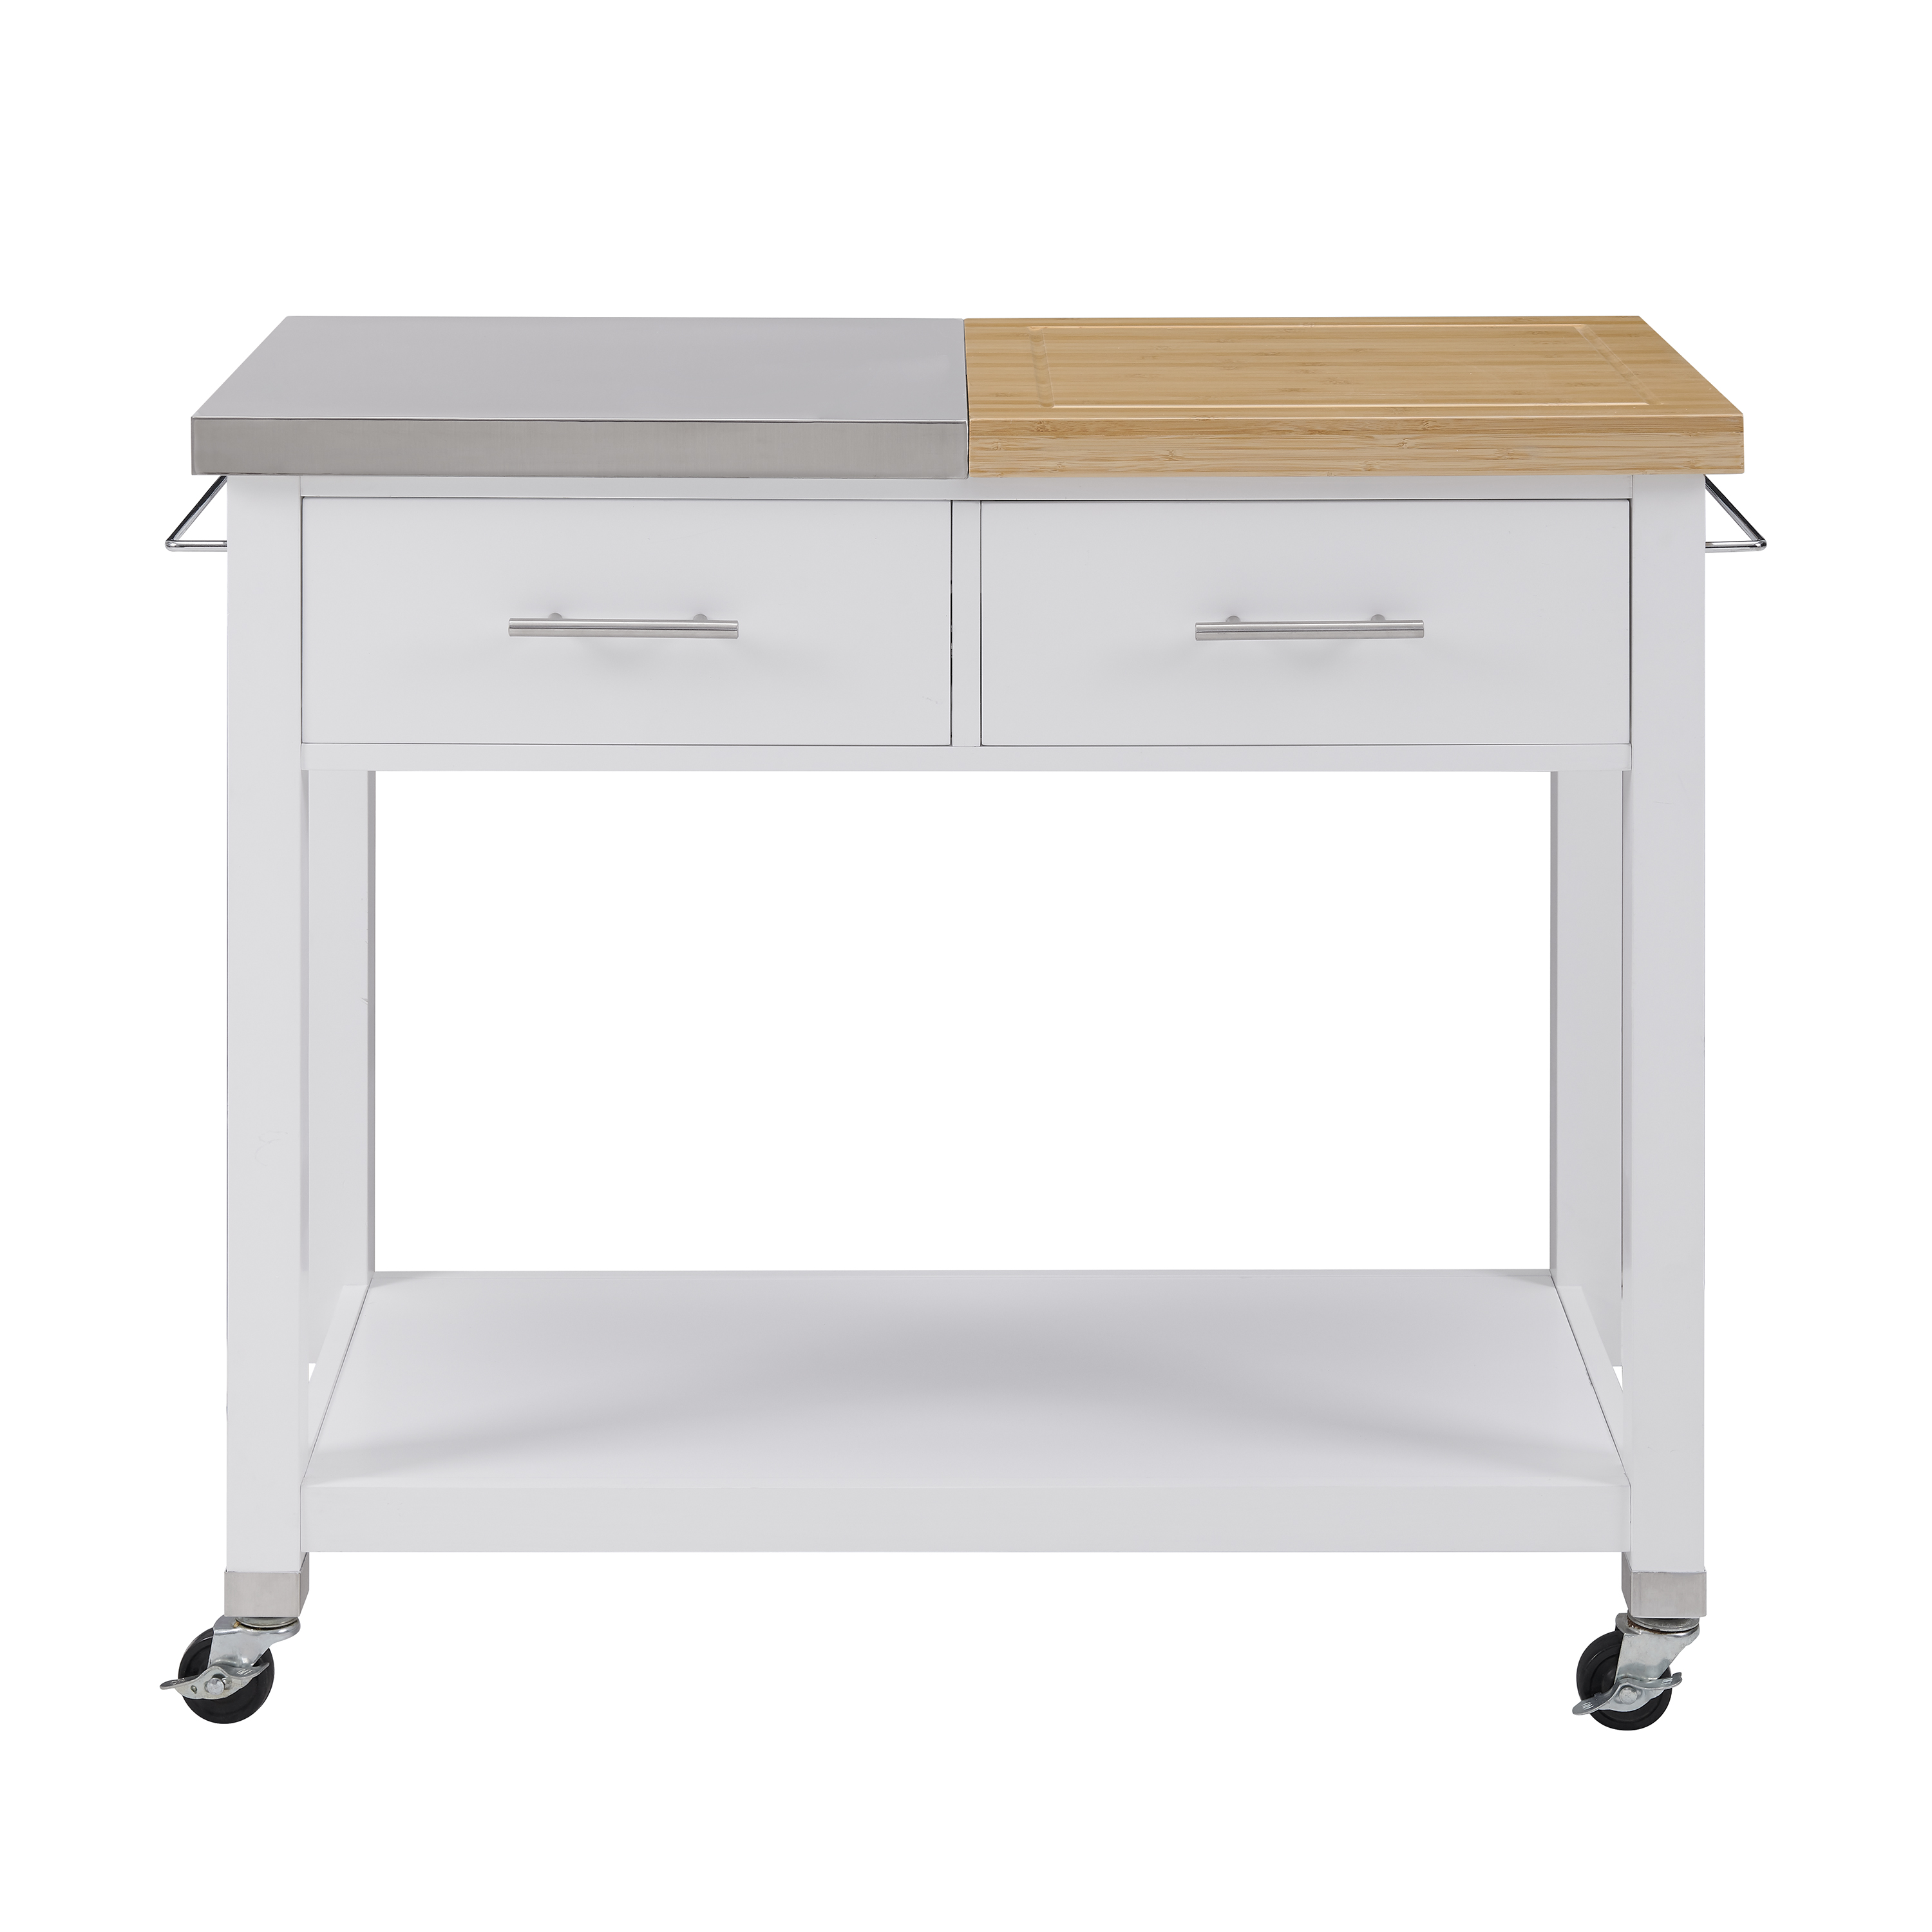 Better Homes & Gardens Maxwell Kitchen Cart (White/Brown) $78.00 + Free Shipping